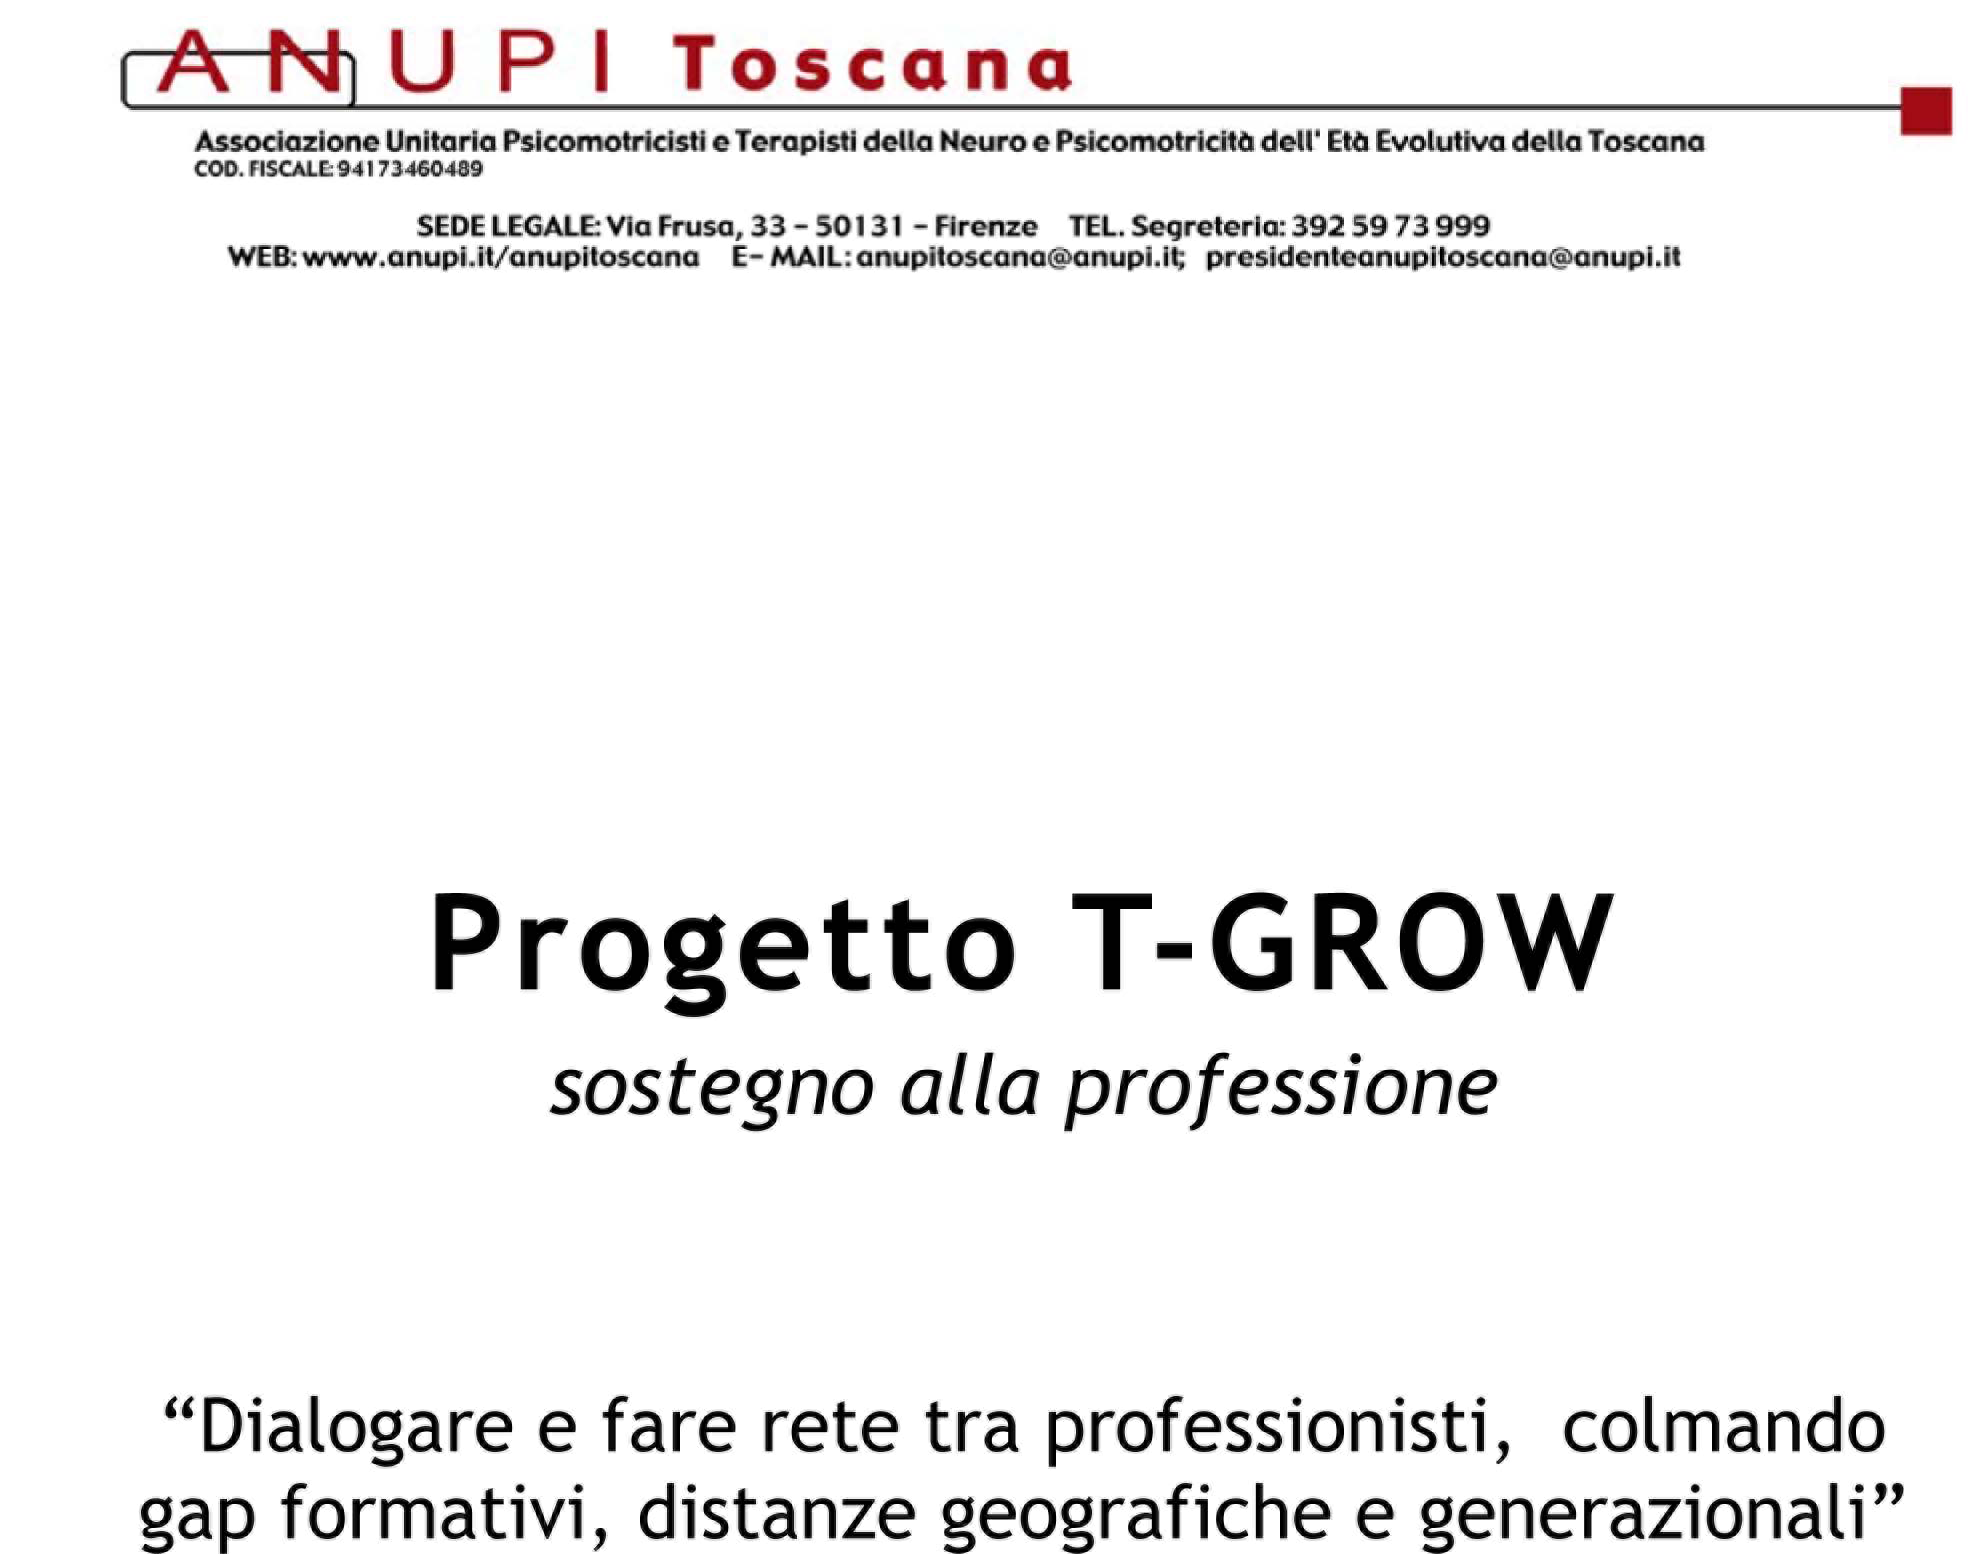 Progetto T-Grow